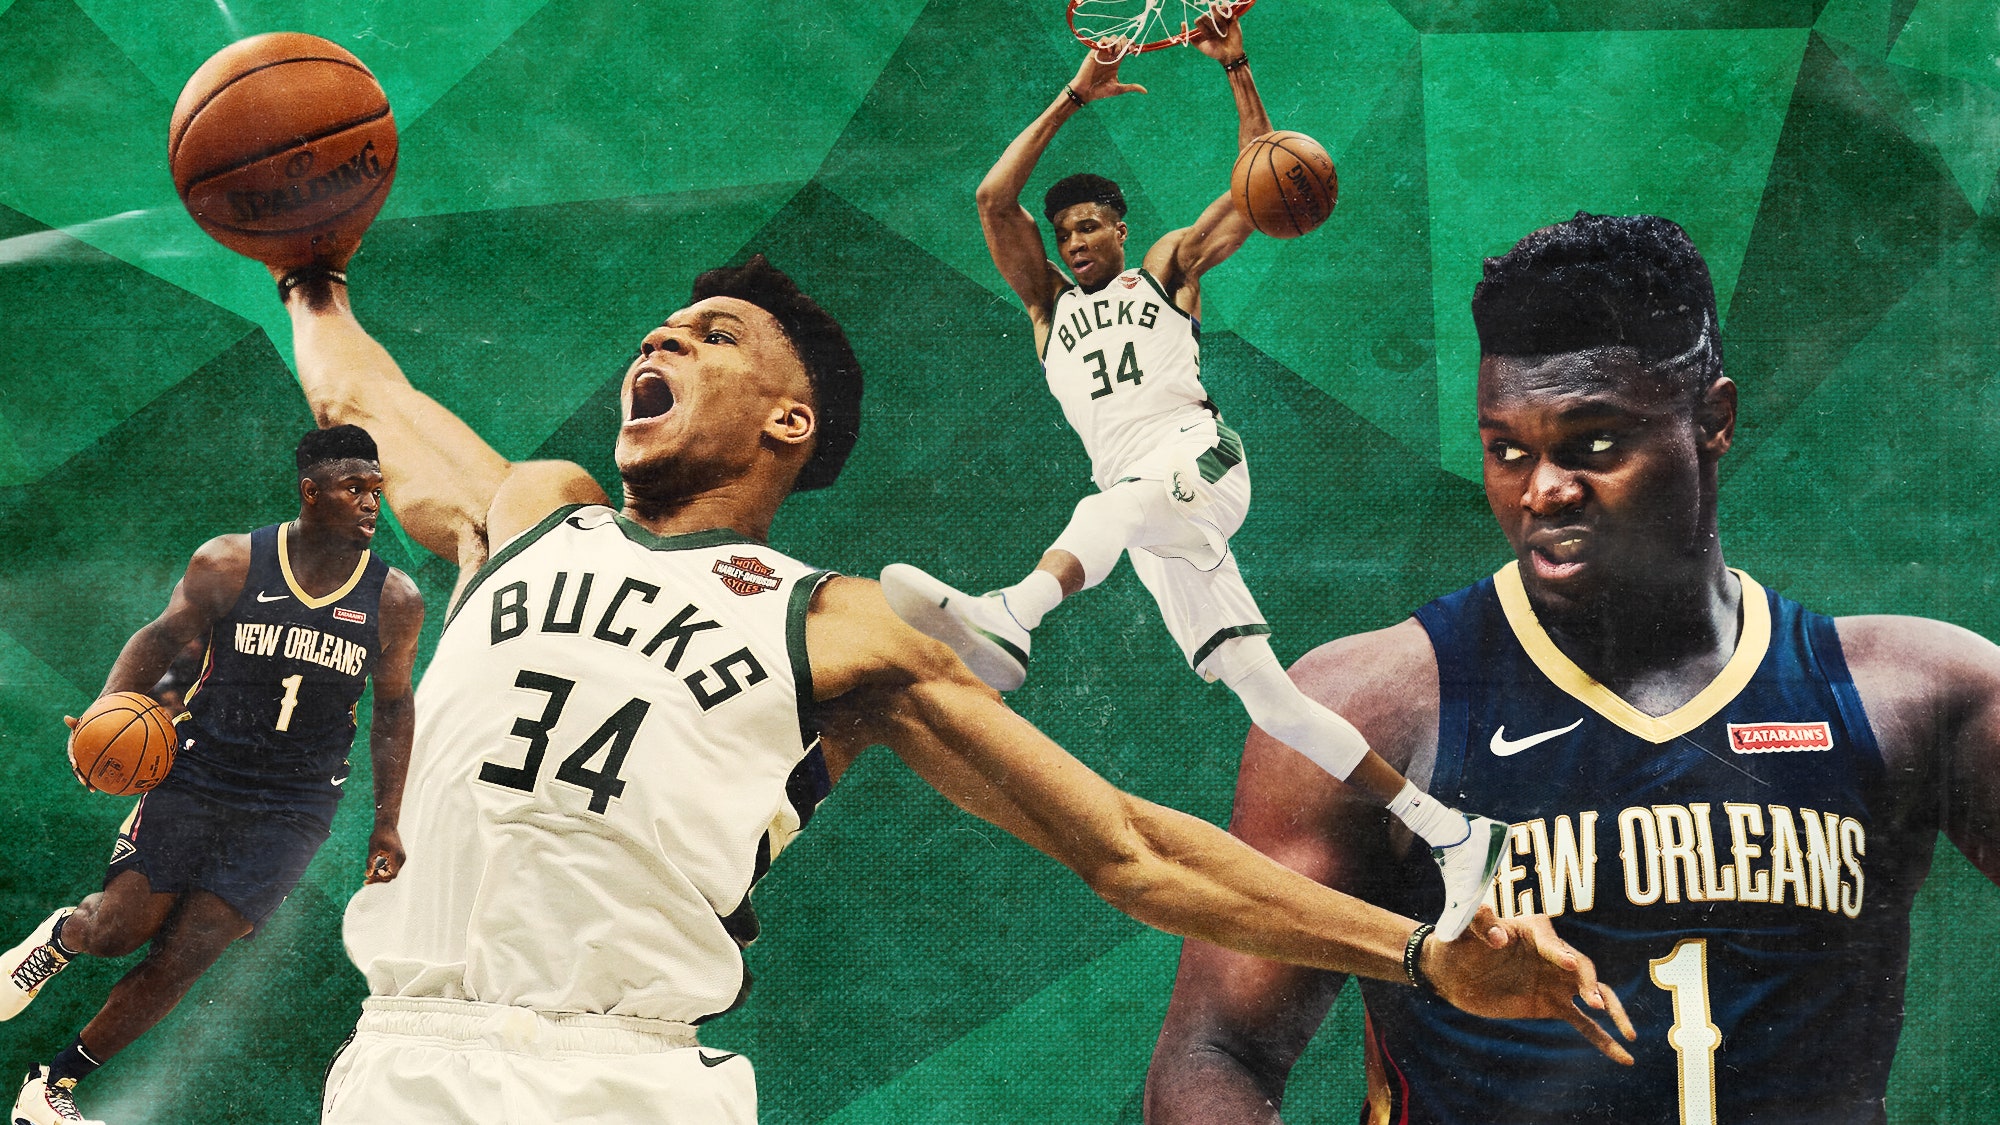 What Happened When Zion Williamson Clashed with Giannis Antetokounmpo